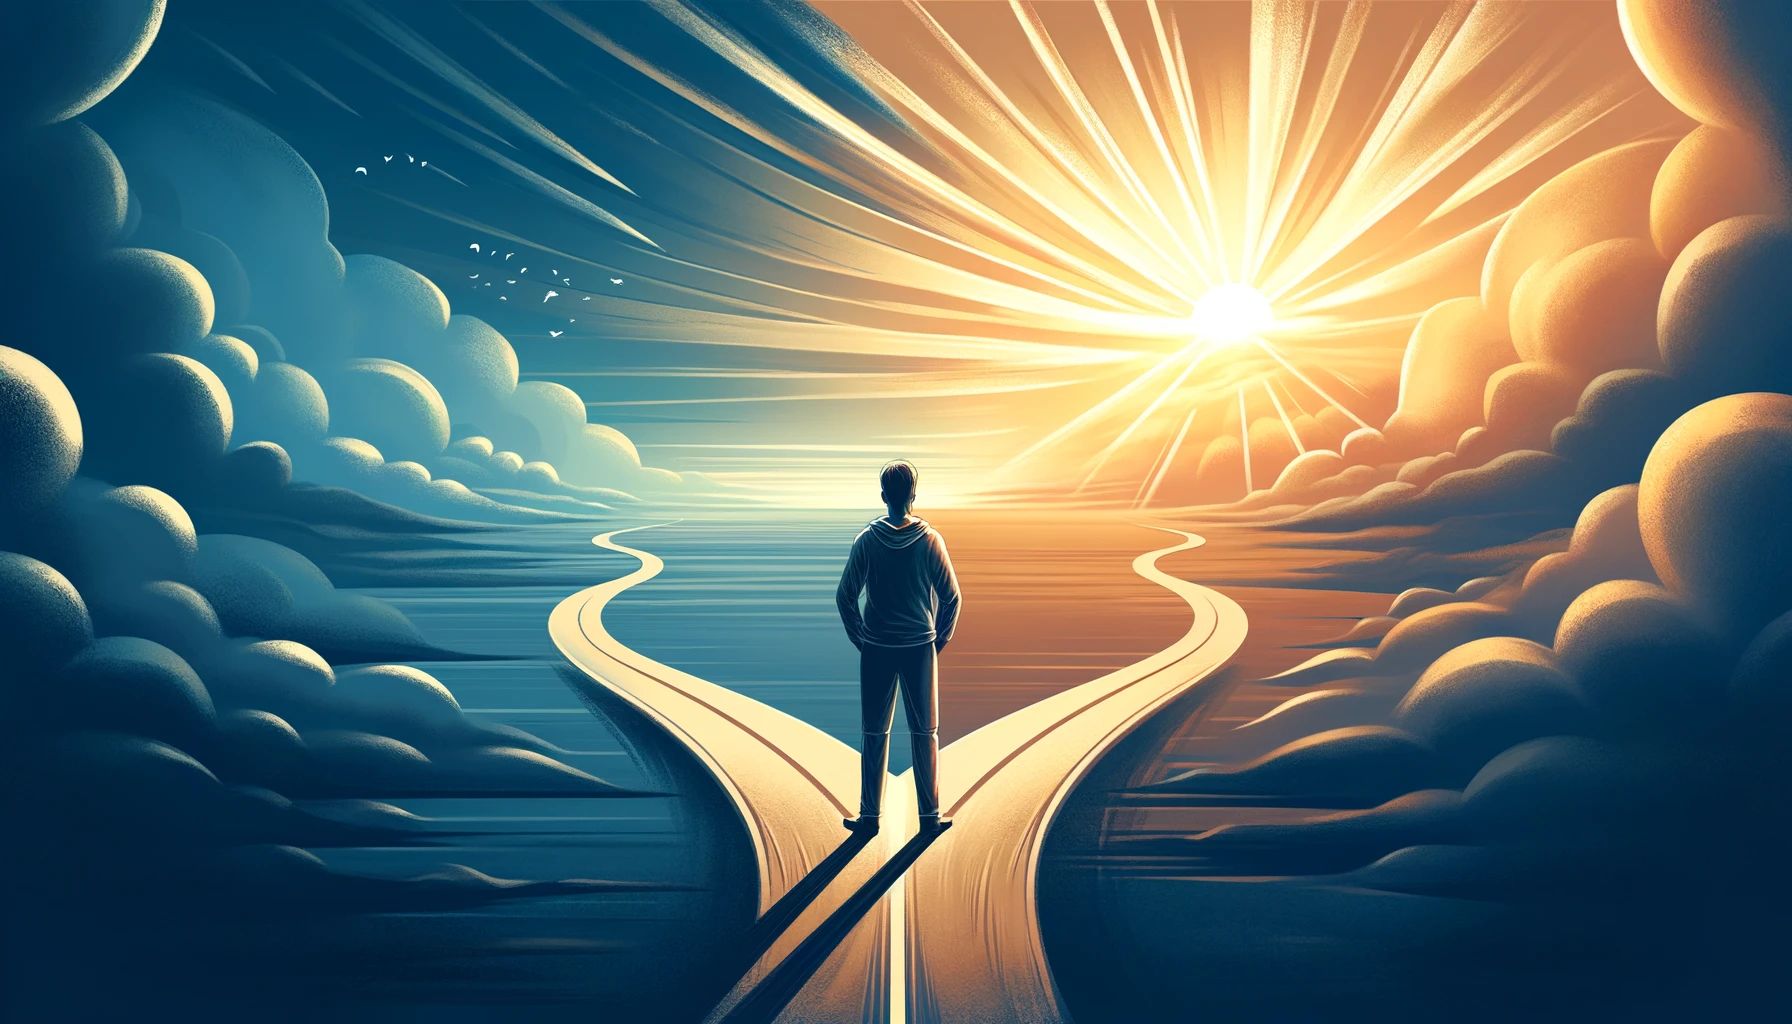 Illustrate the concept of personal responsibility and decision-making in recovery. The image should depict a person standing at a crossroads, looking